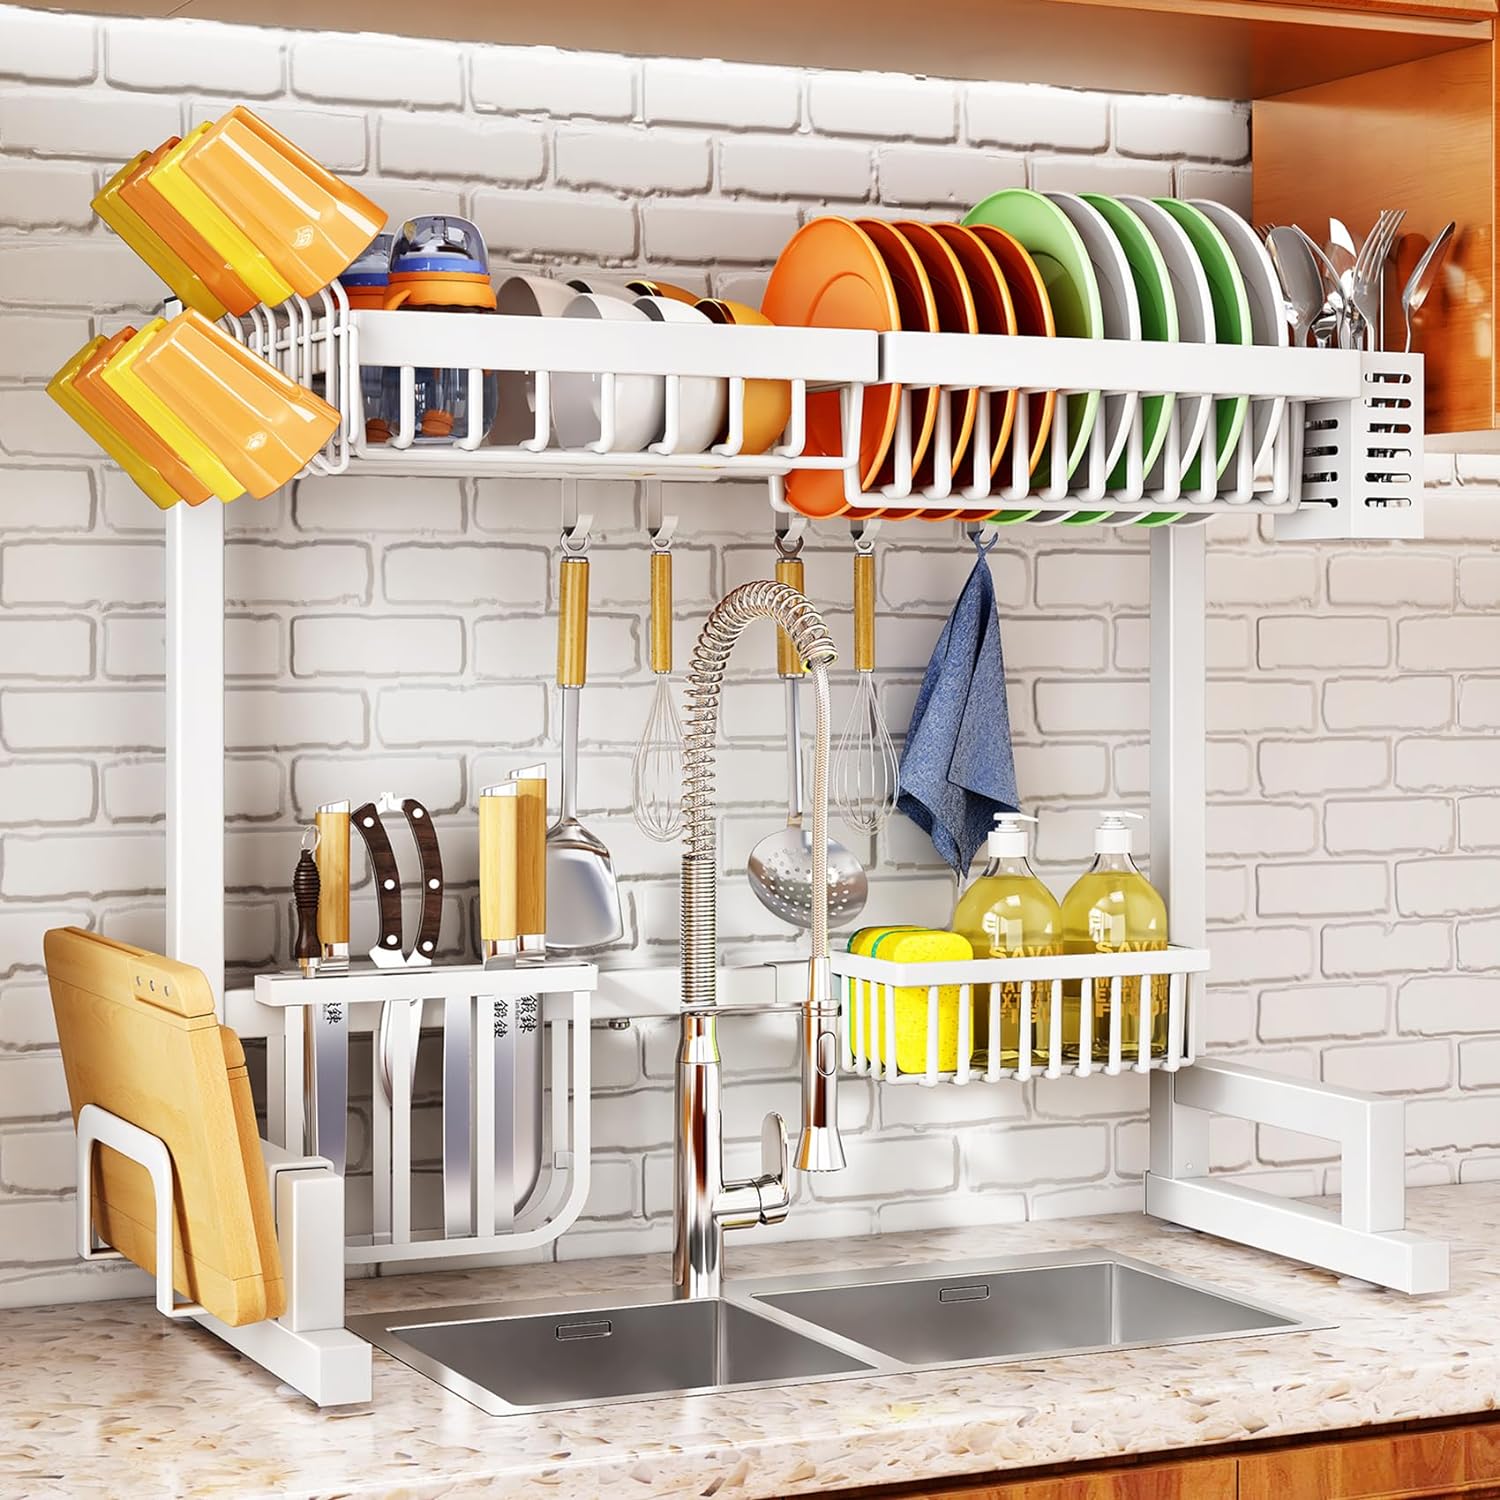 Over The Sink Dish Drying Rack, Adjustable (26.8 to 34.6) Large Dish  Drying Rack for Kitchen Counter with Multiple Baskets Utensil Sponge Holder  Sink Caddy, 2 Tier White